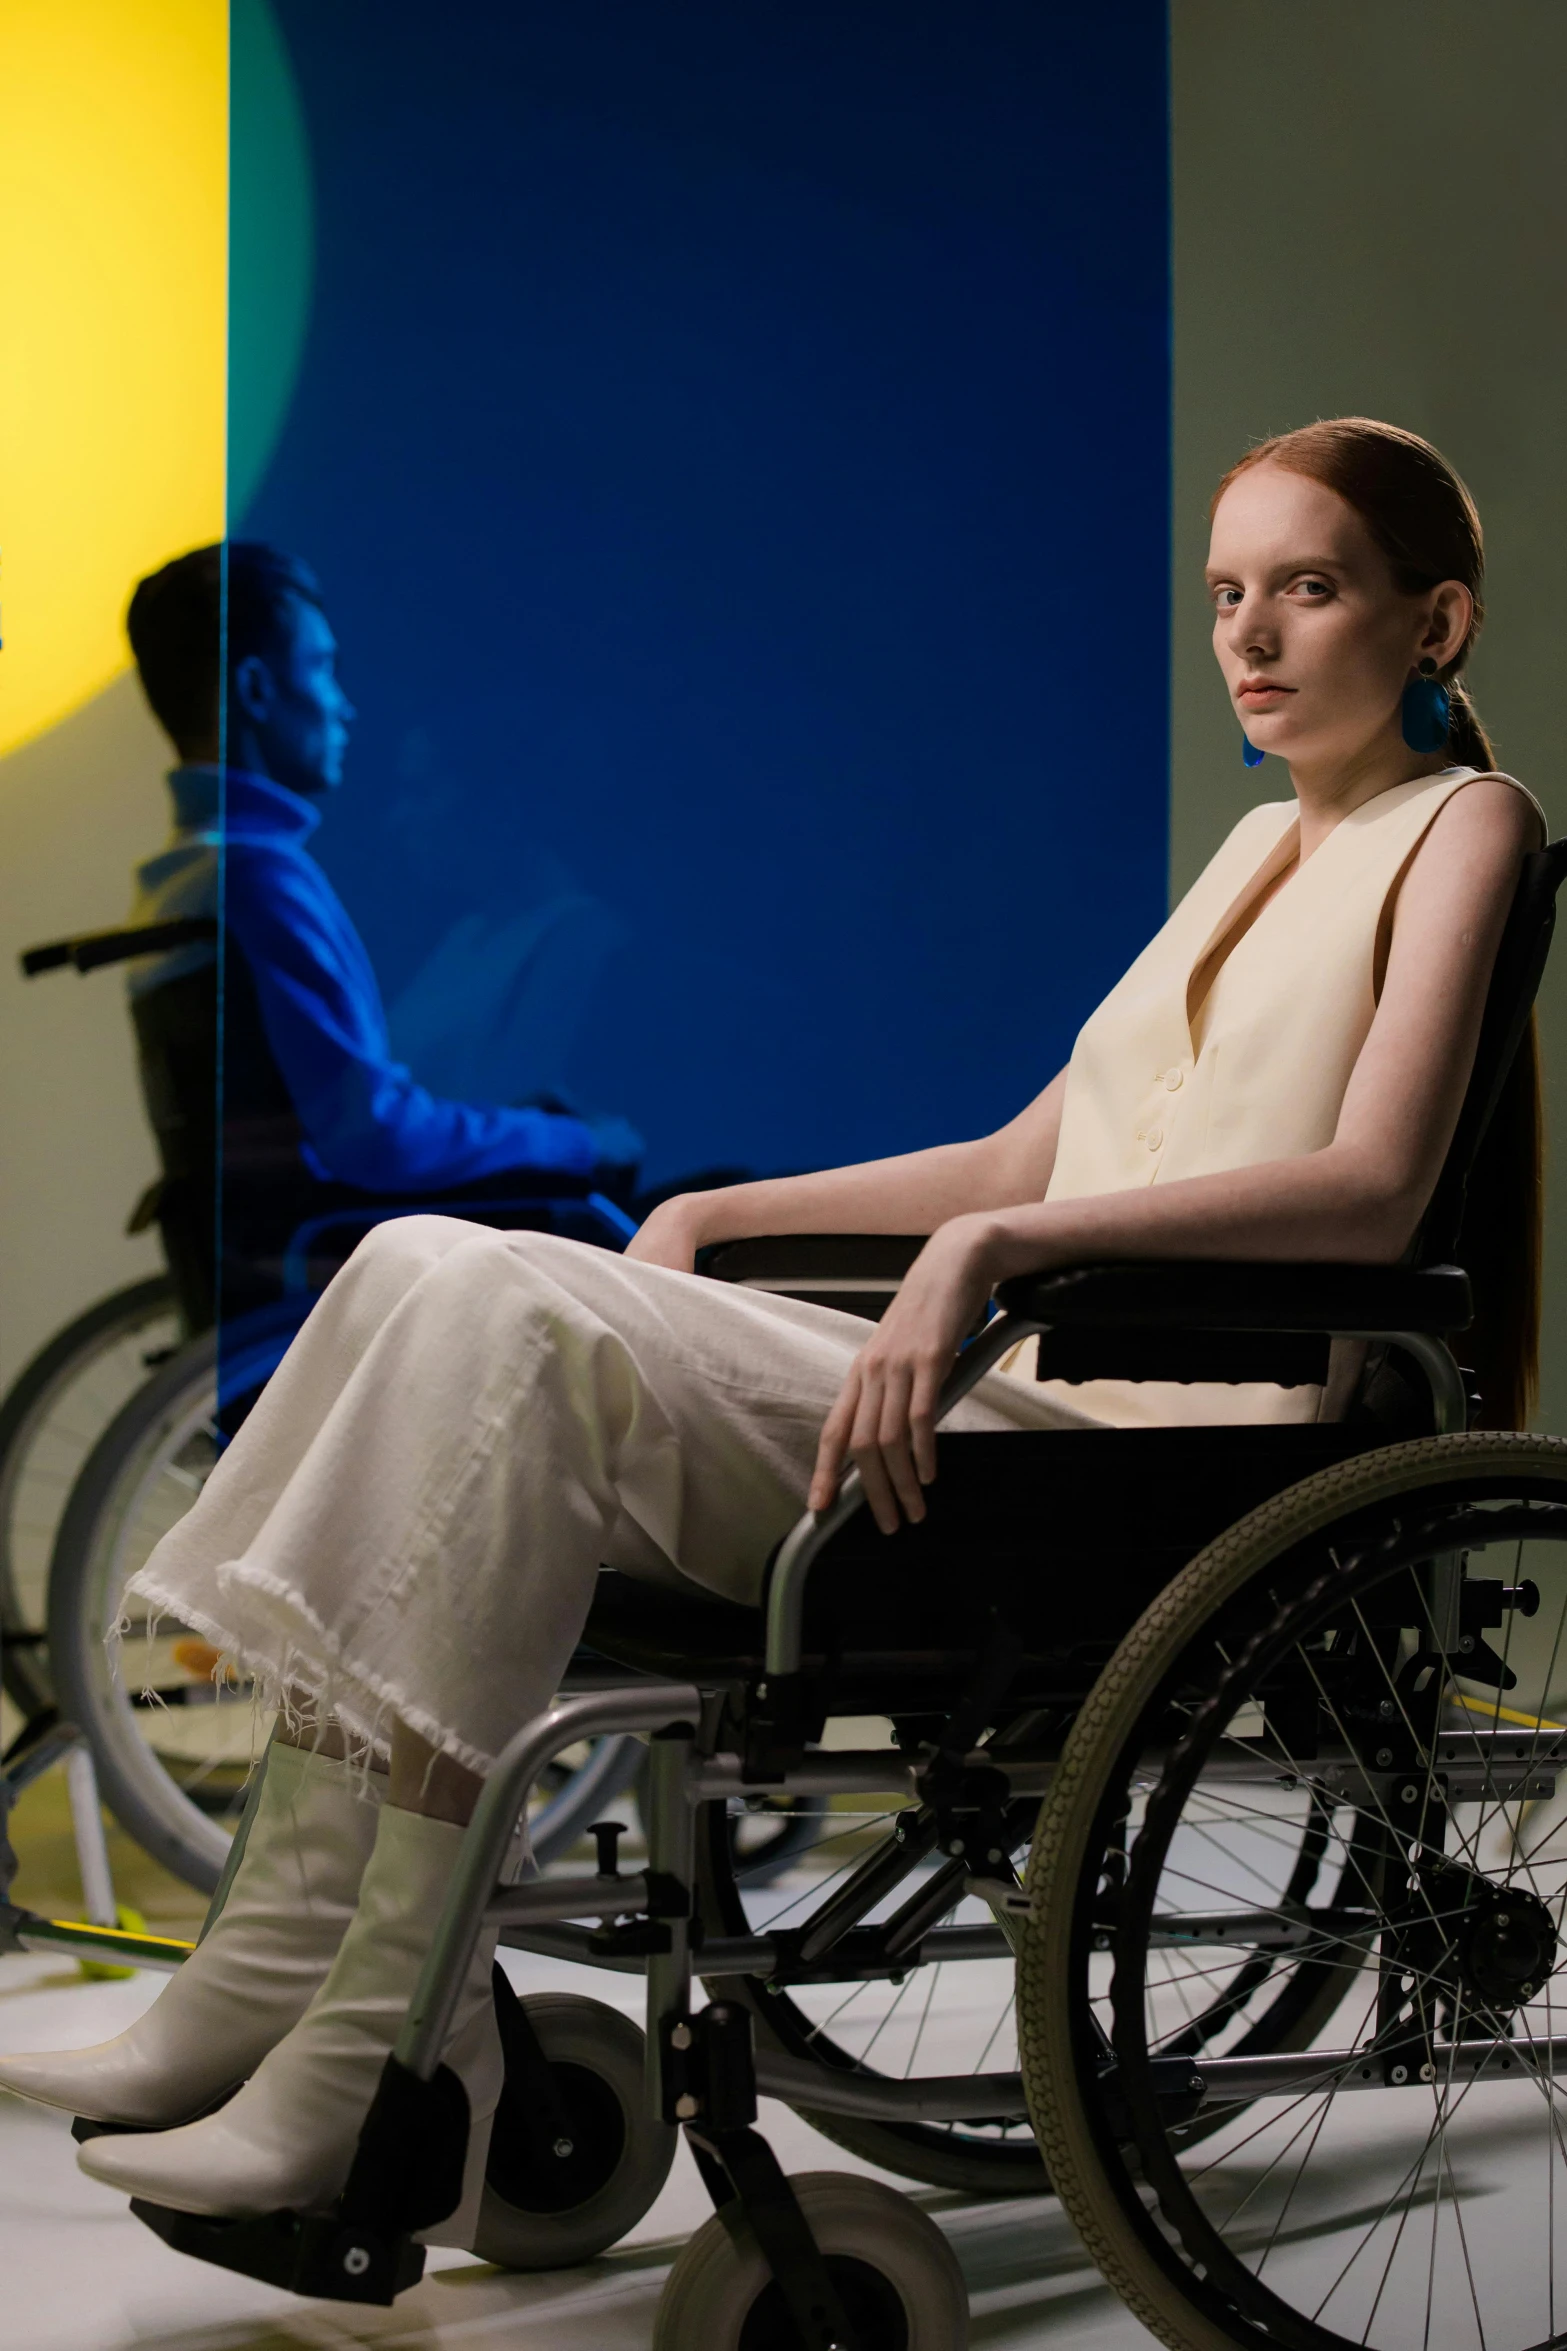 a woman sitting in a wheel chair in a room, an album cover, inspired by Suzanne Duchamp-Crotti, trending on unsplash, hans bellmer and nadav kander, model is wearing techtical vest, evening light, healthcare